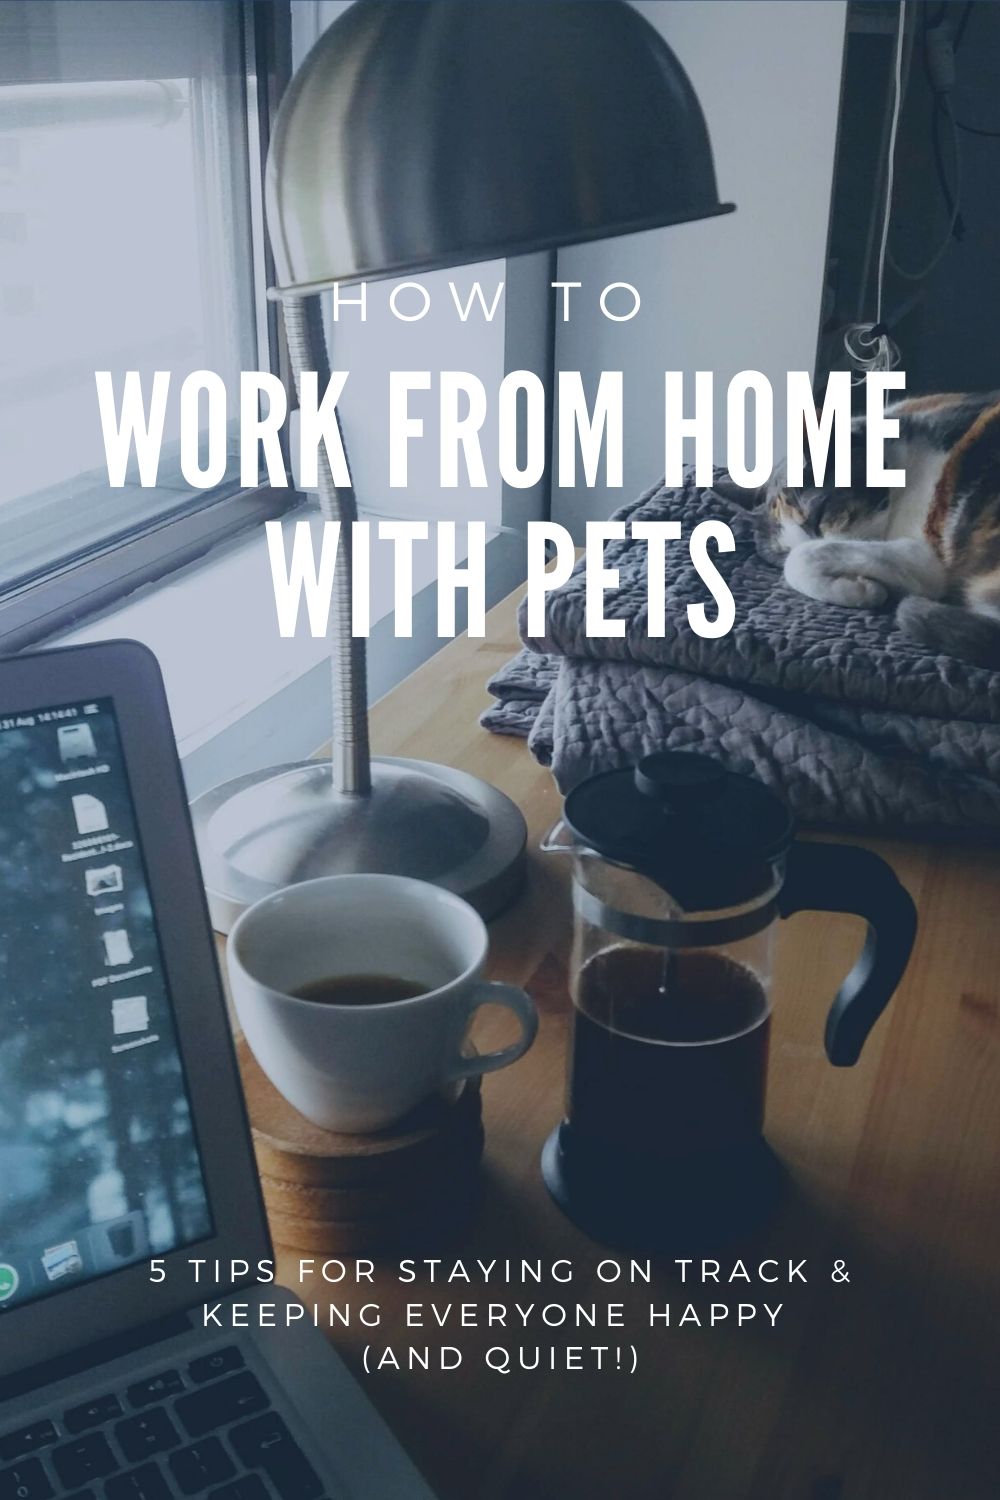 How to work from home with pets